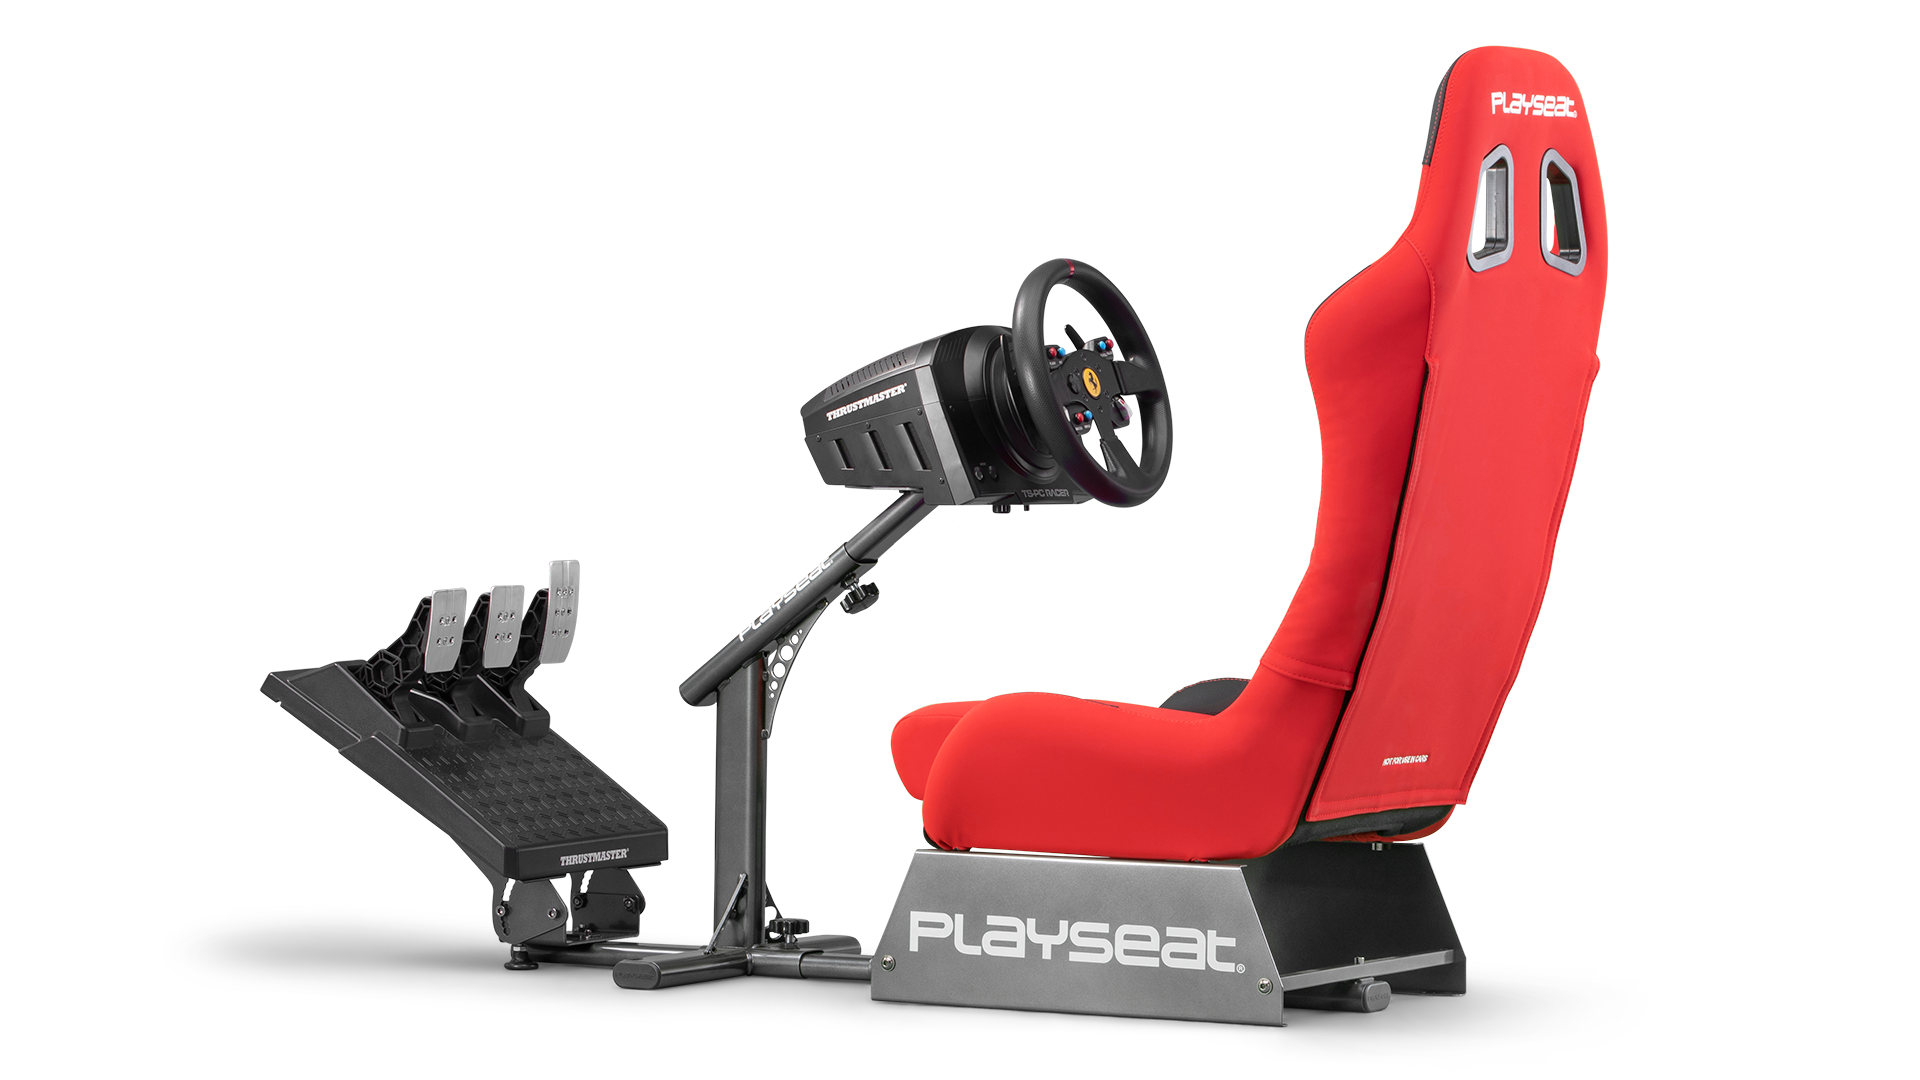 playseat-evolution-red-racing-simulator-back-angle-view-thrustmaster-1920x1080-1.png